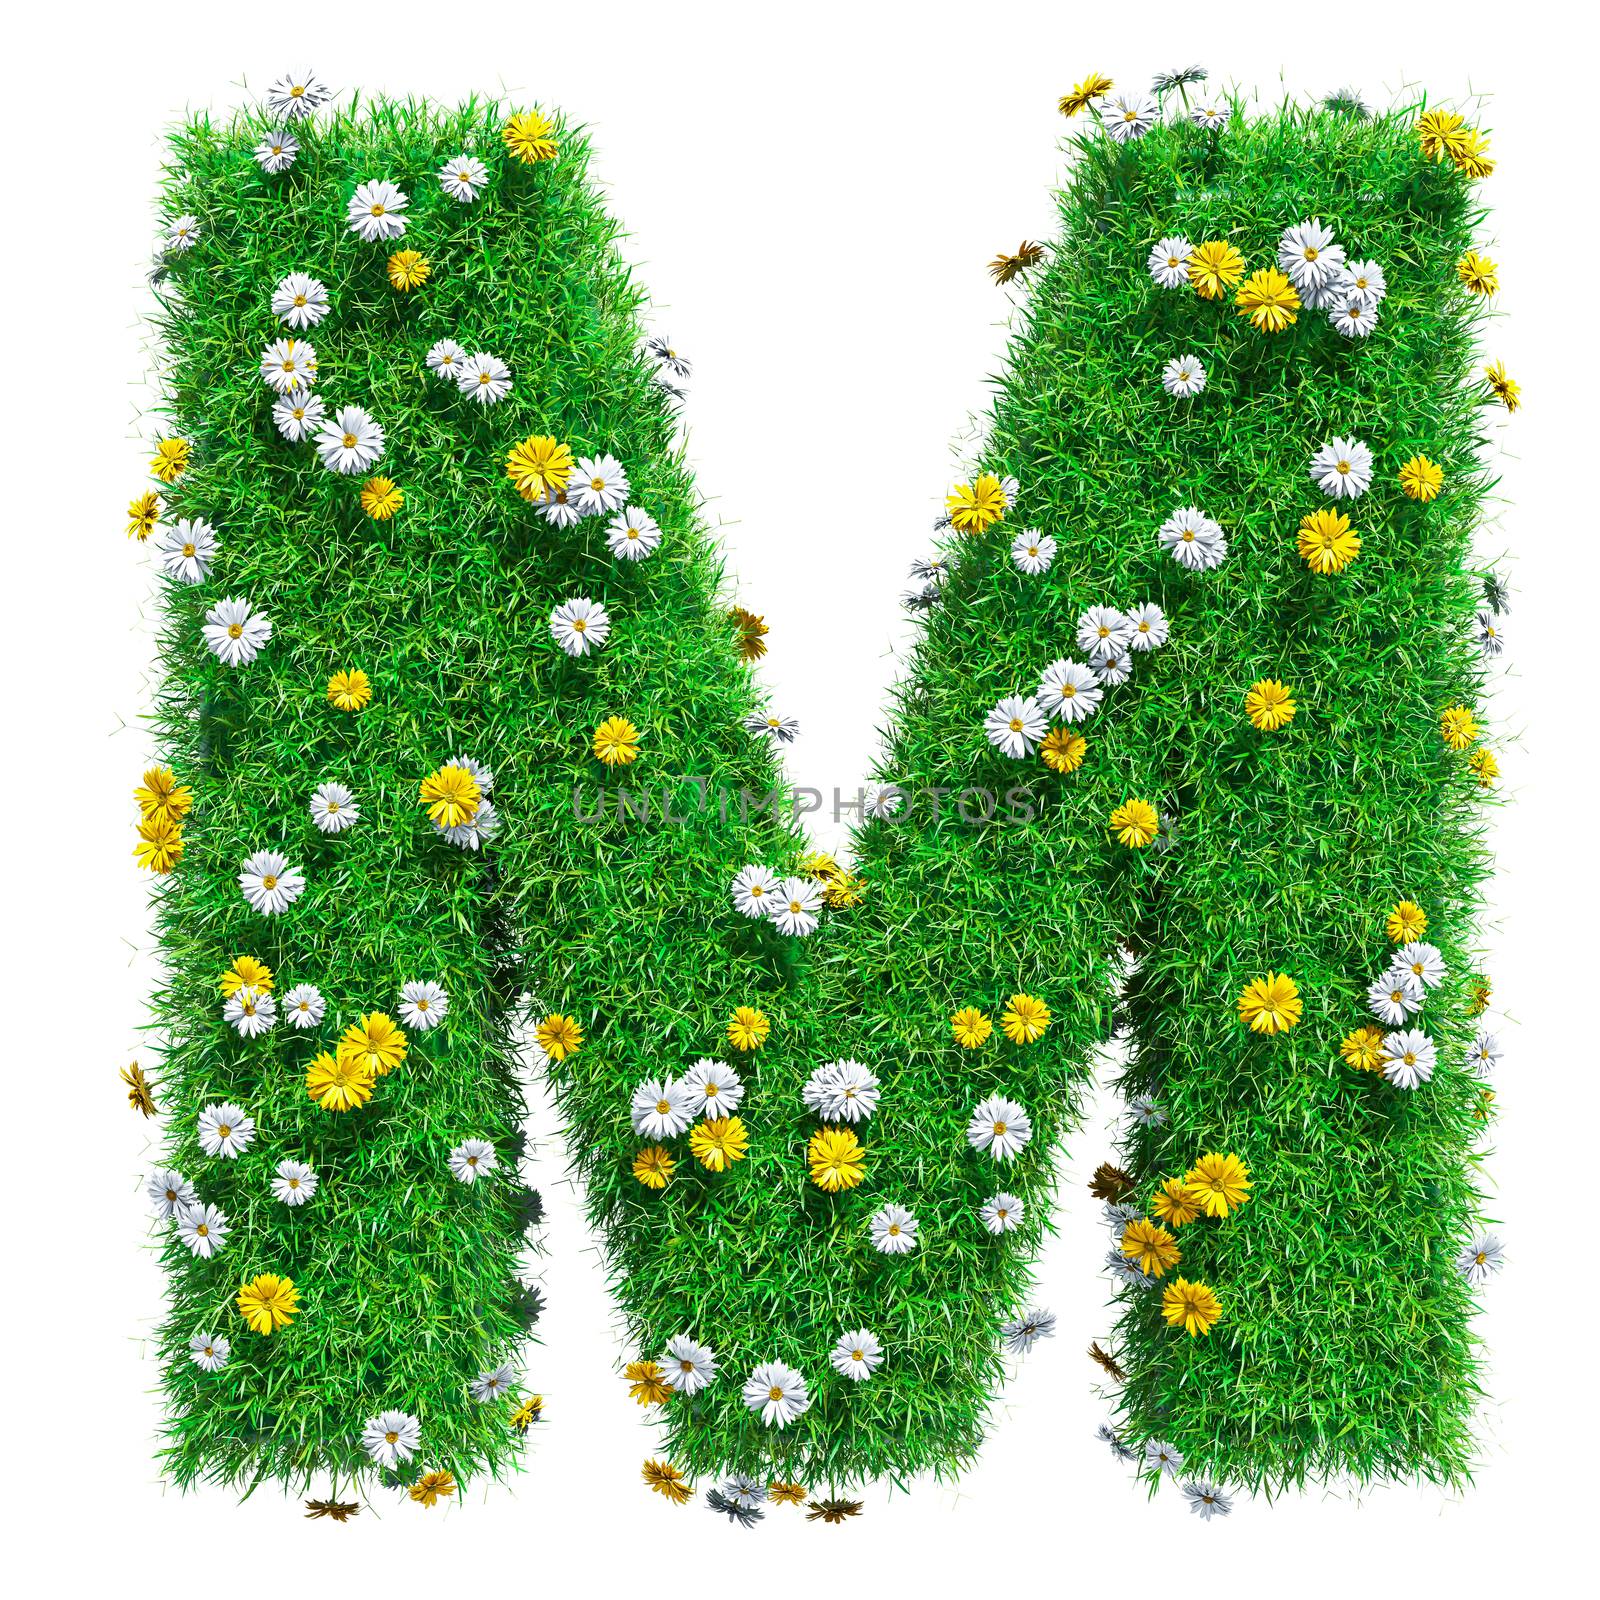 Letter M Of Green Grass And Flowers by cherezoff